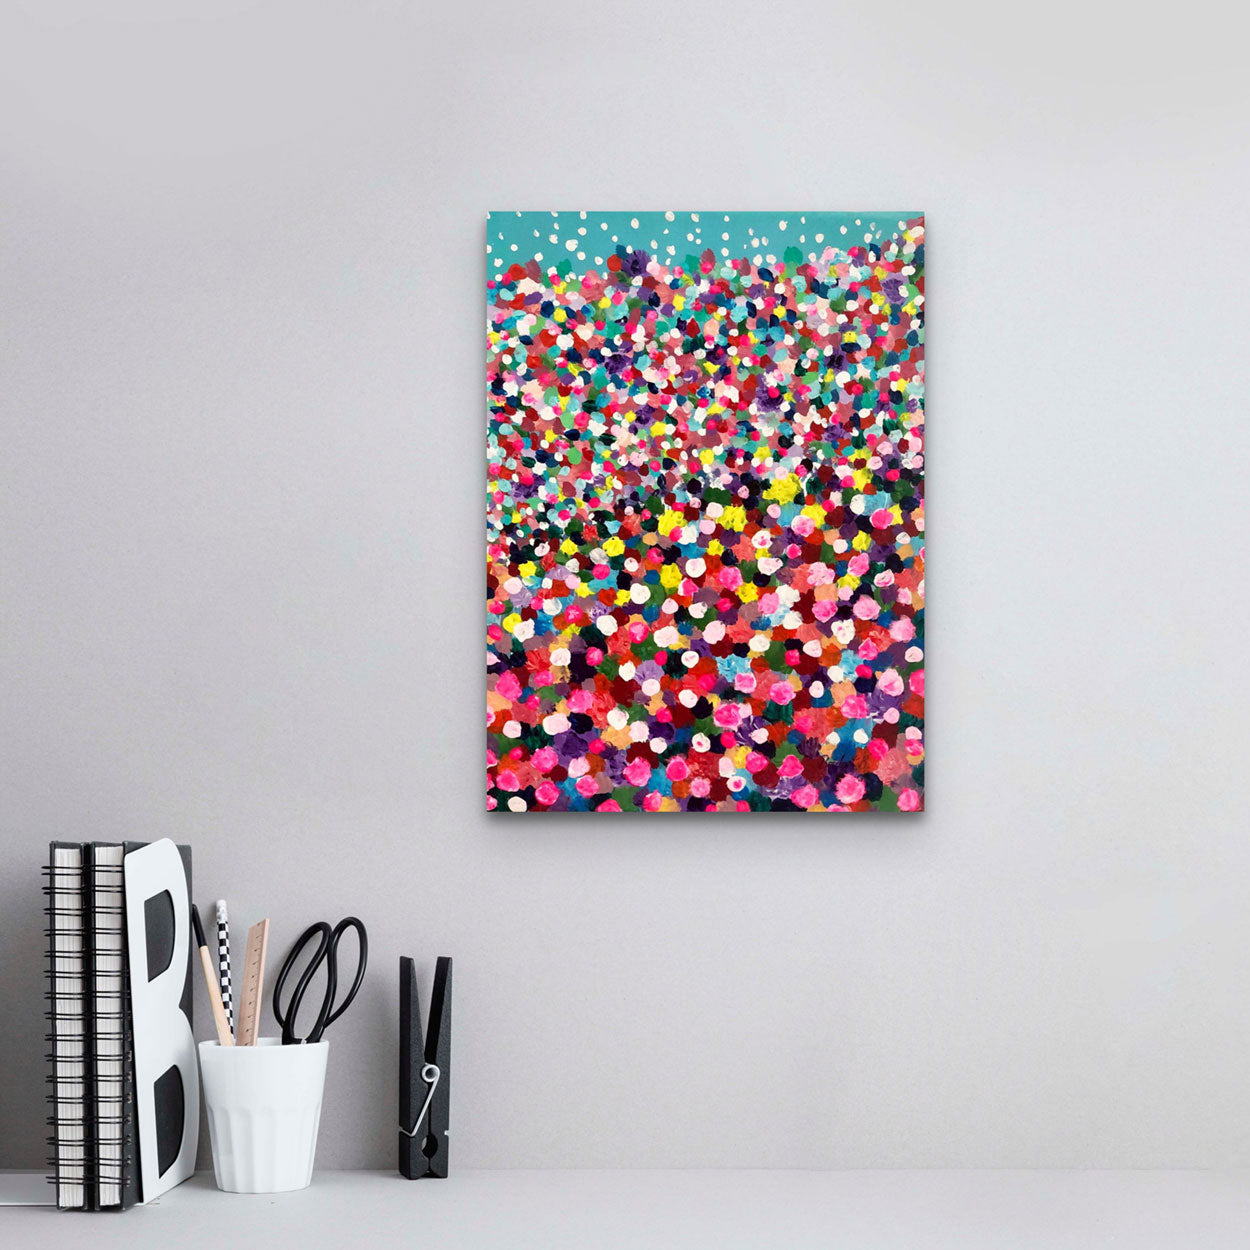 Sea of Umbrellas, bright original painting hanging in work space.Abstract expressionism art by Bridget Bradley